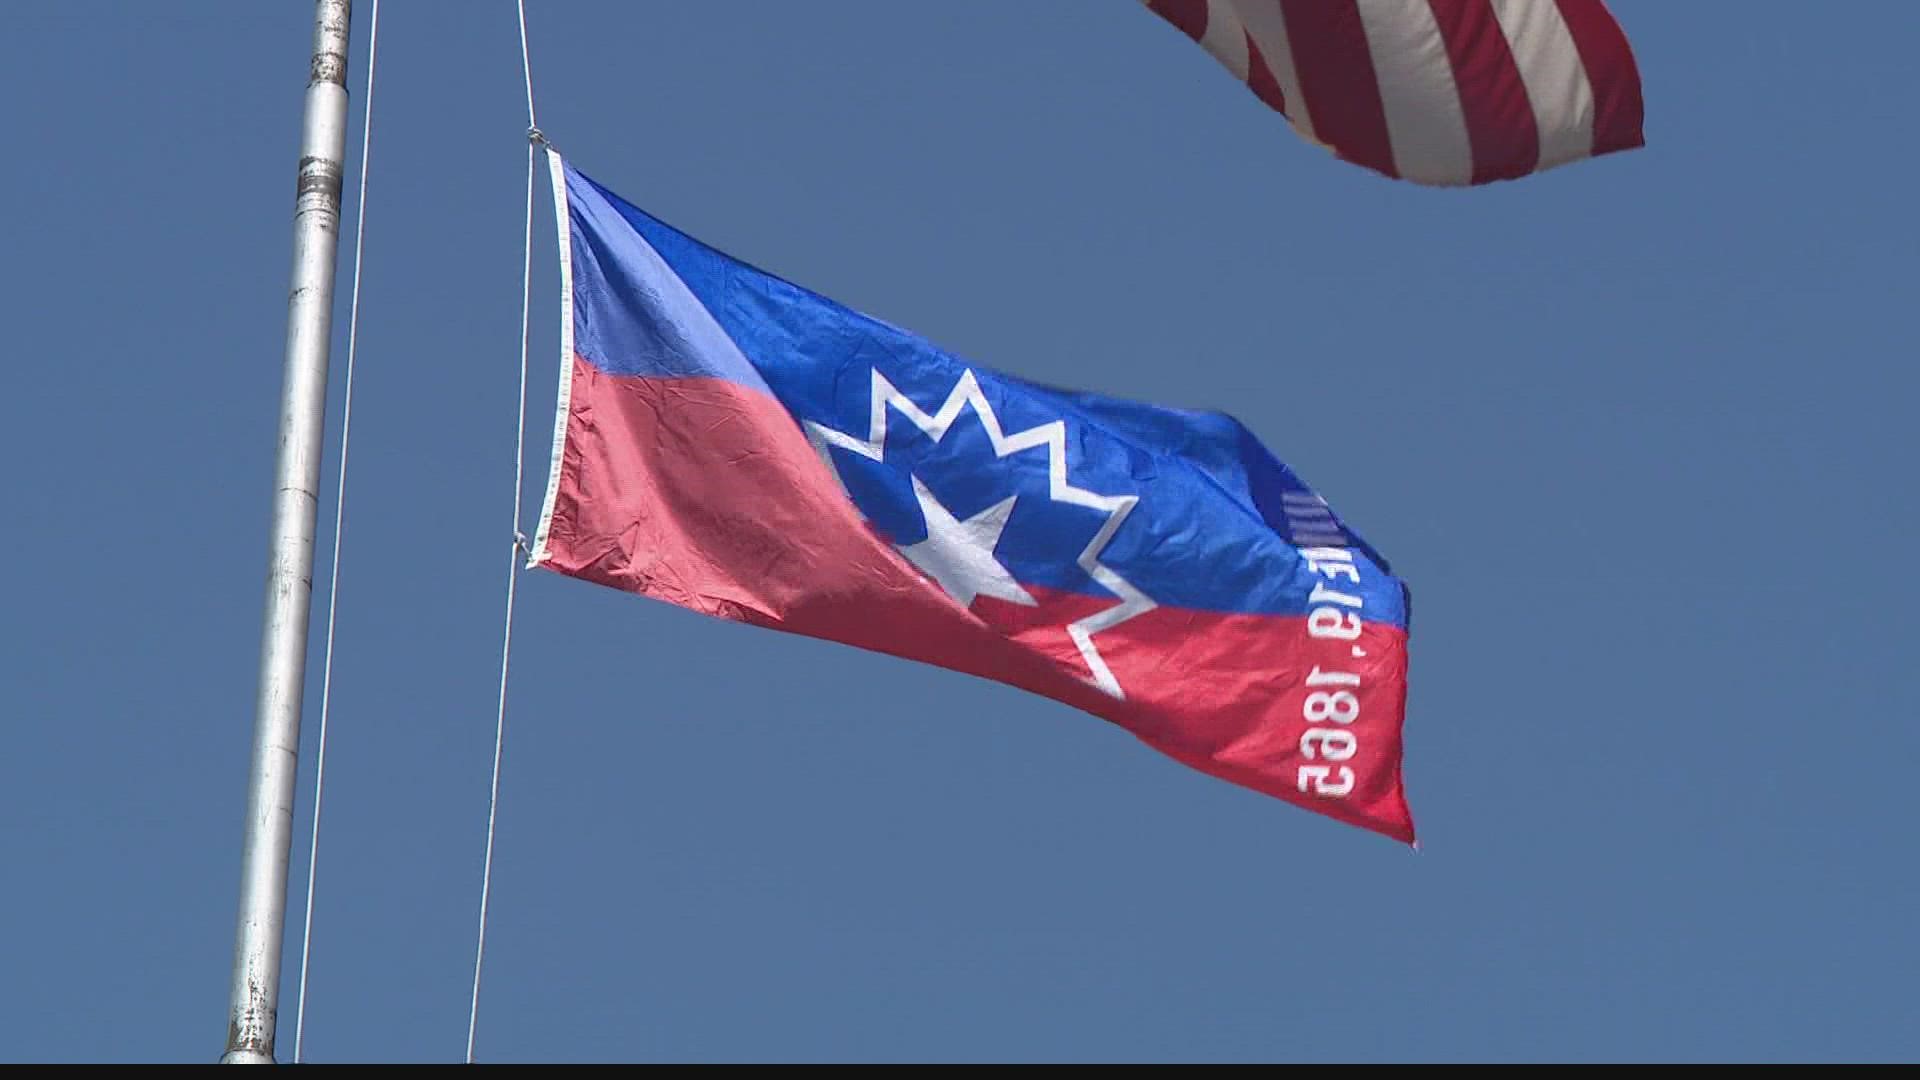 A red and blue flag with a white bursting star was raised high at St. Louis City Hall to commemorate the Juneteenth on Friday. It honors the historic end of slavery.